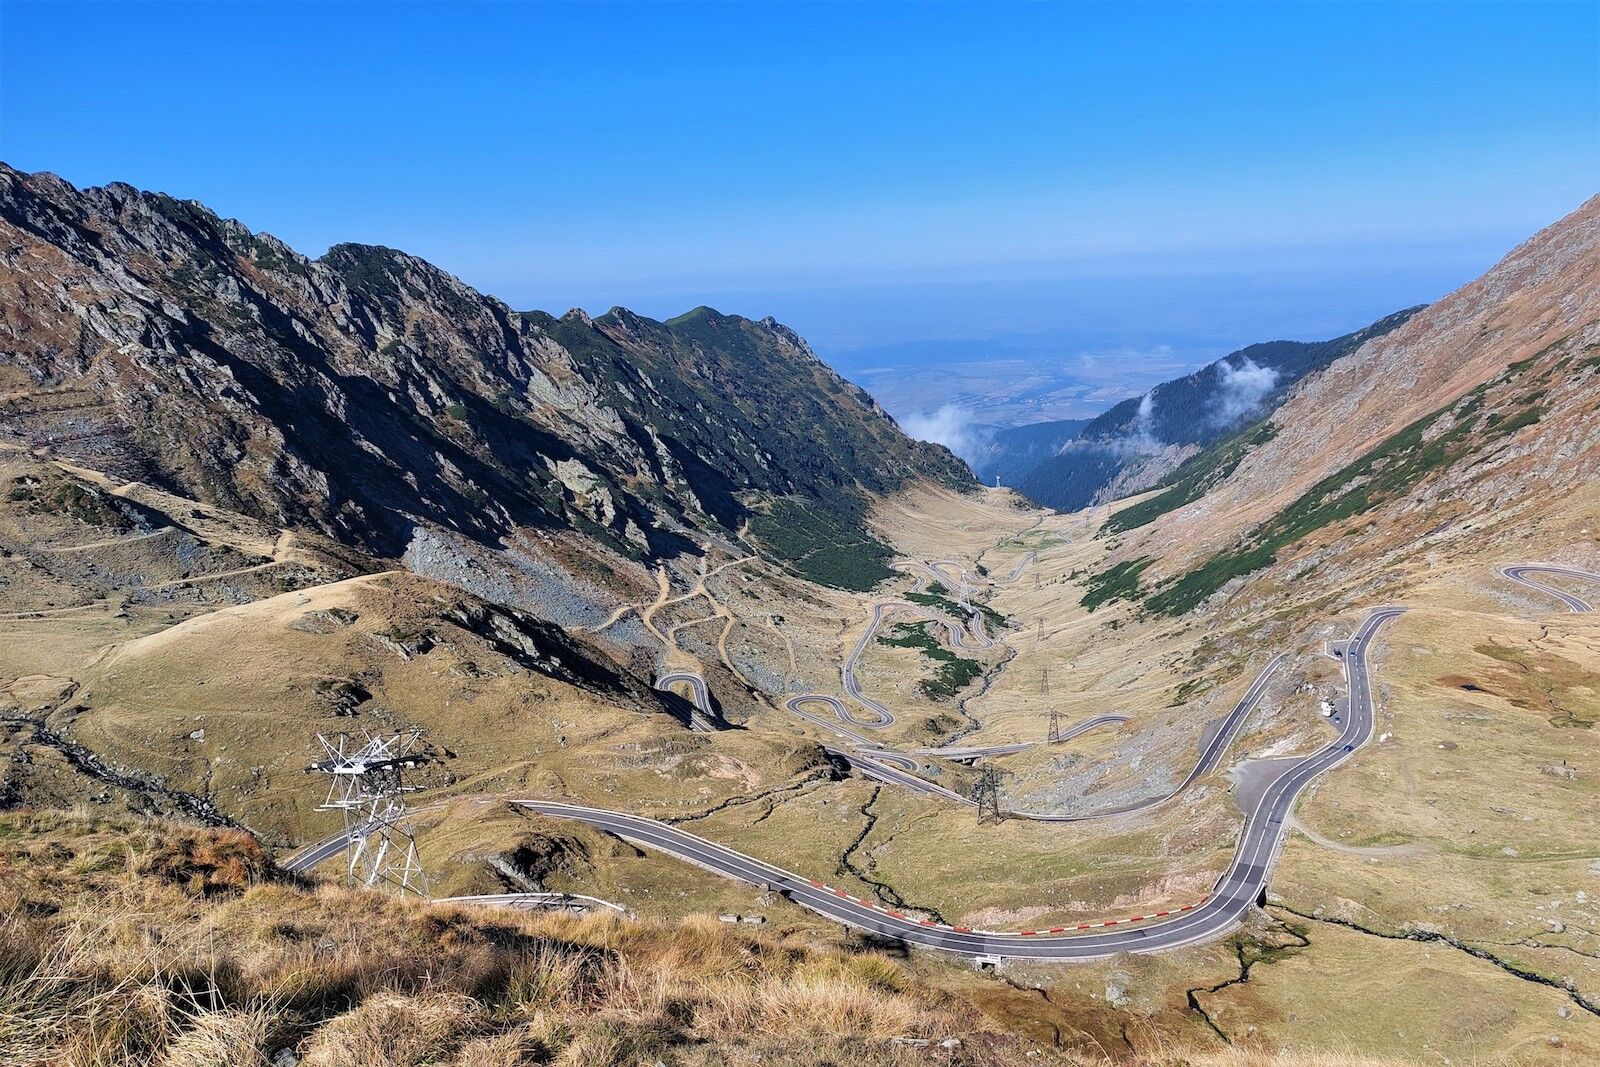 The Transfăgărășan, a road known for frequent grizzly bear sightings in Romania